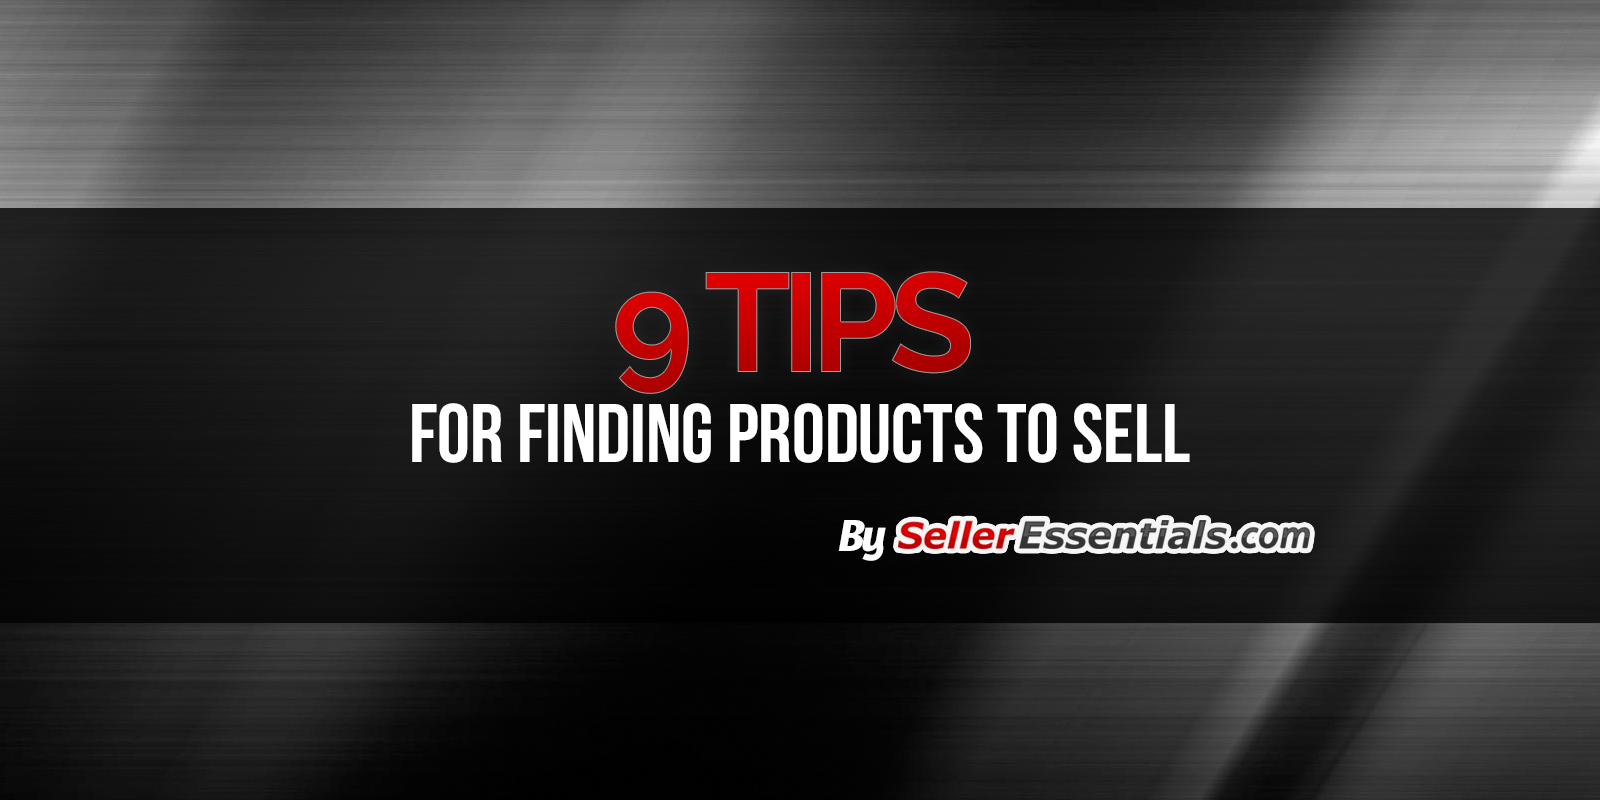 9 tips for finding products to sell